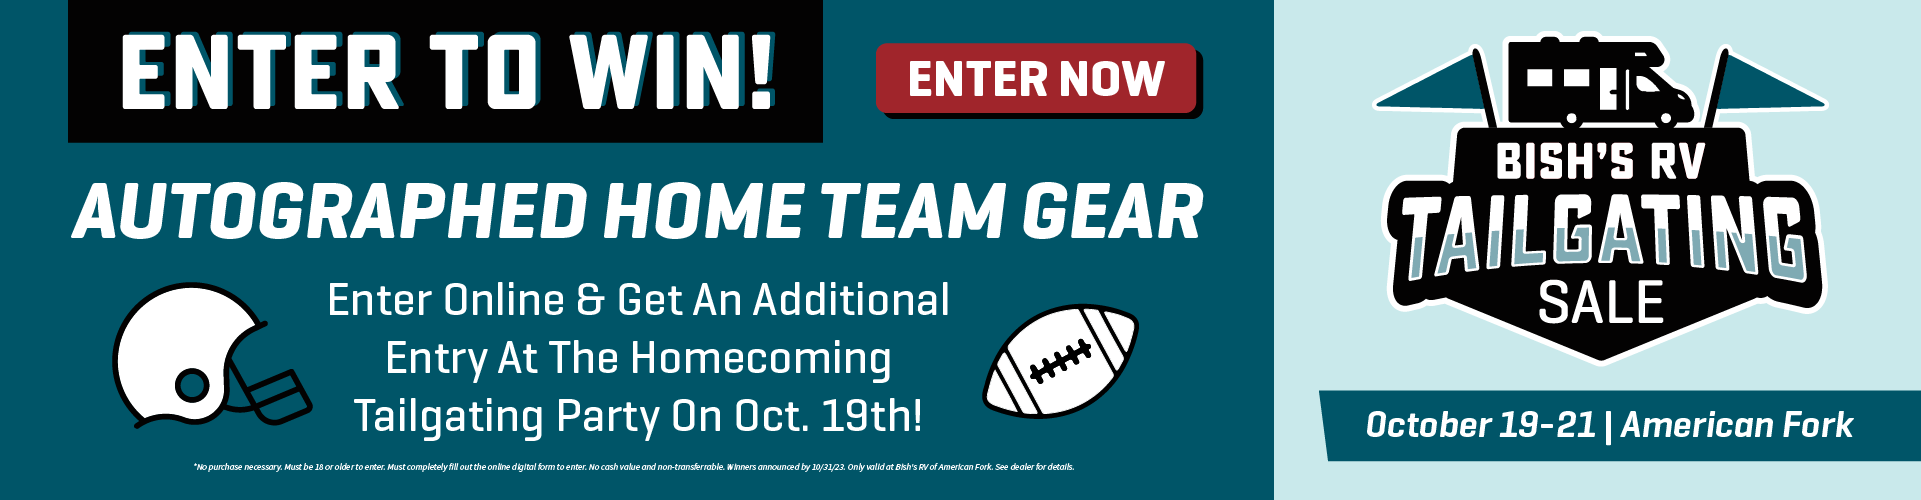 Tailgating Sale - Enter to Win Autographed Home Team Gear - Oct. 19-21 - Bish's RV of American Fork